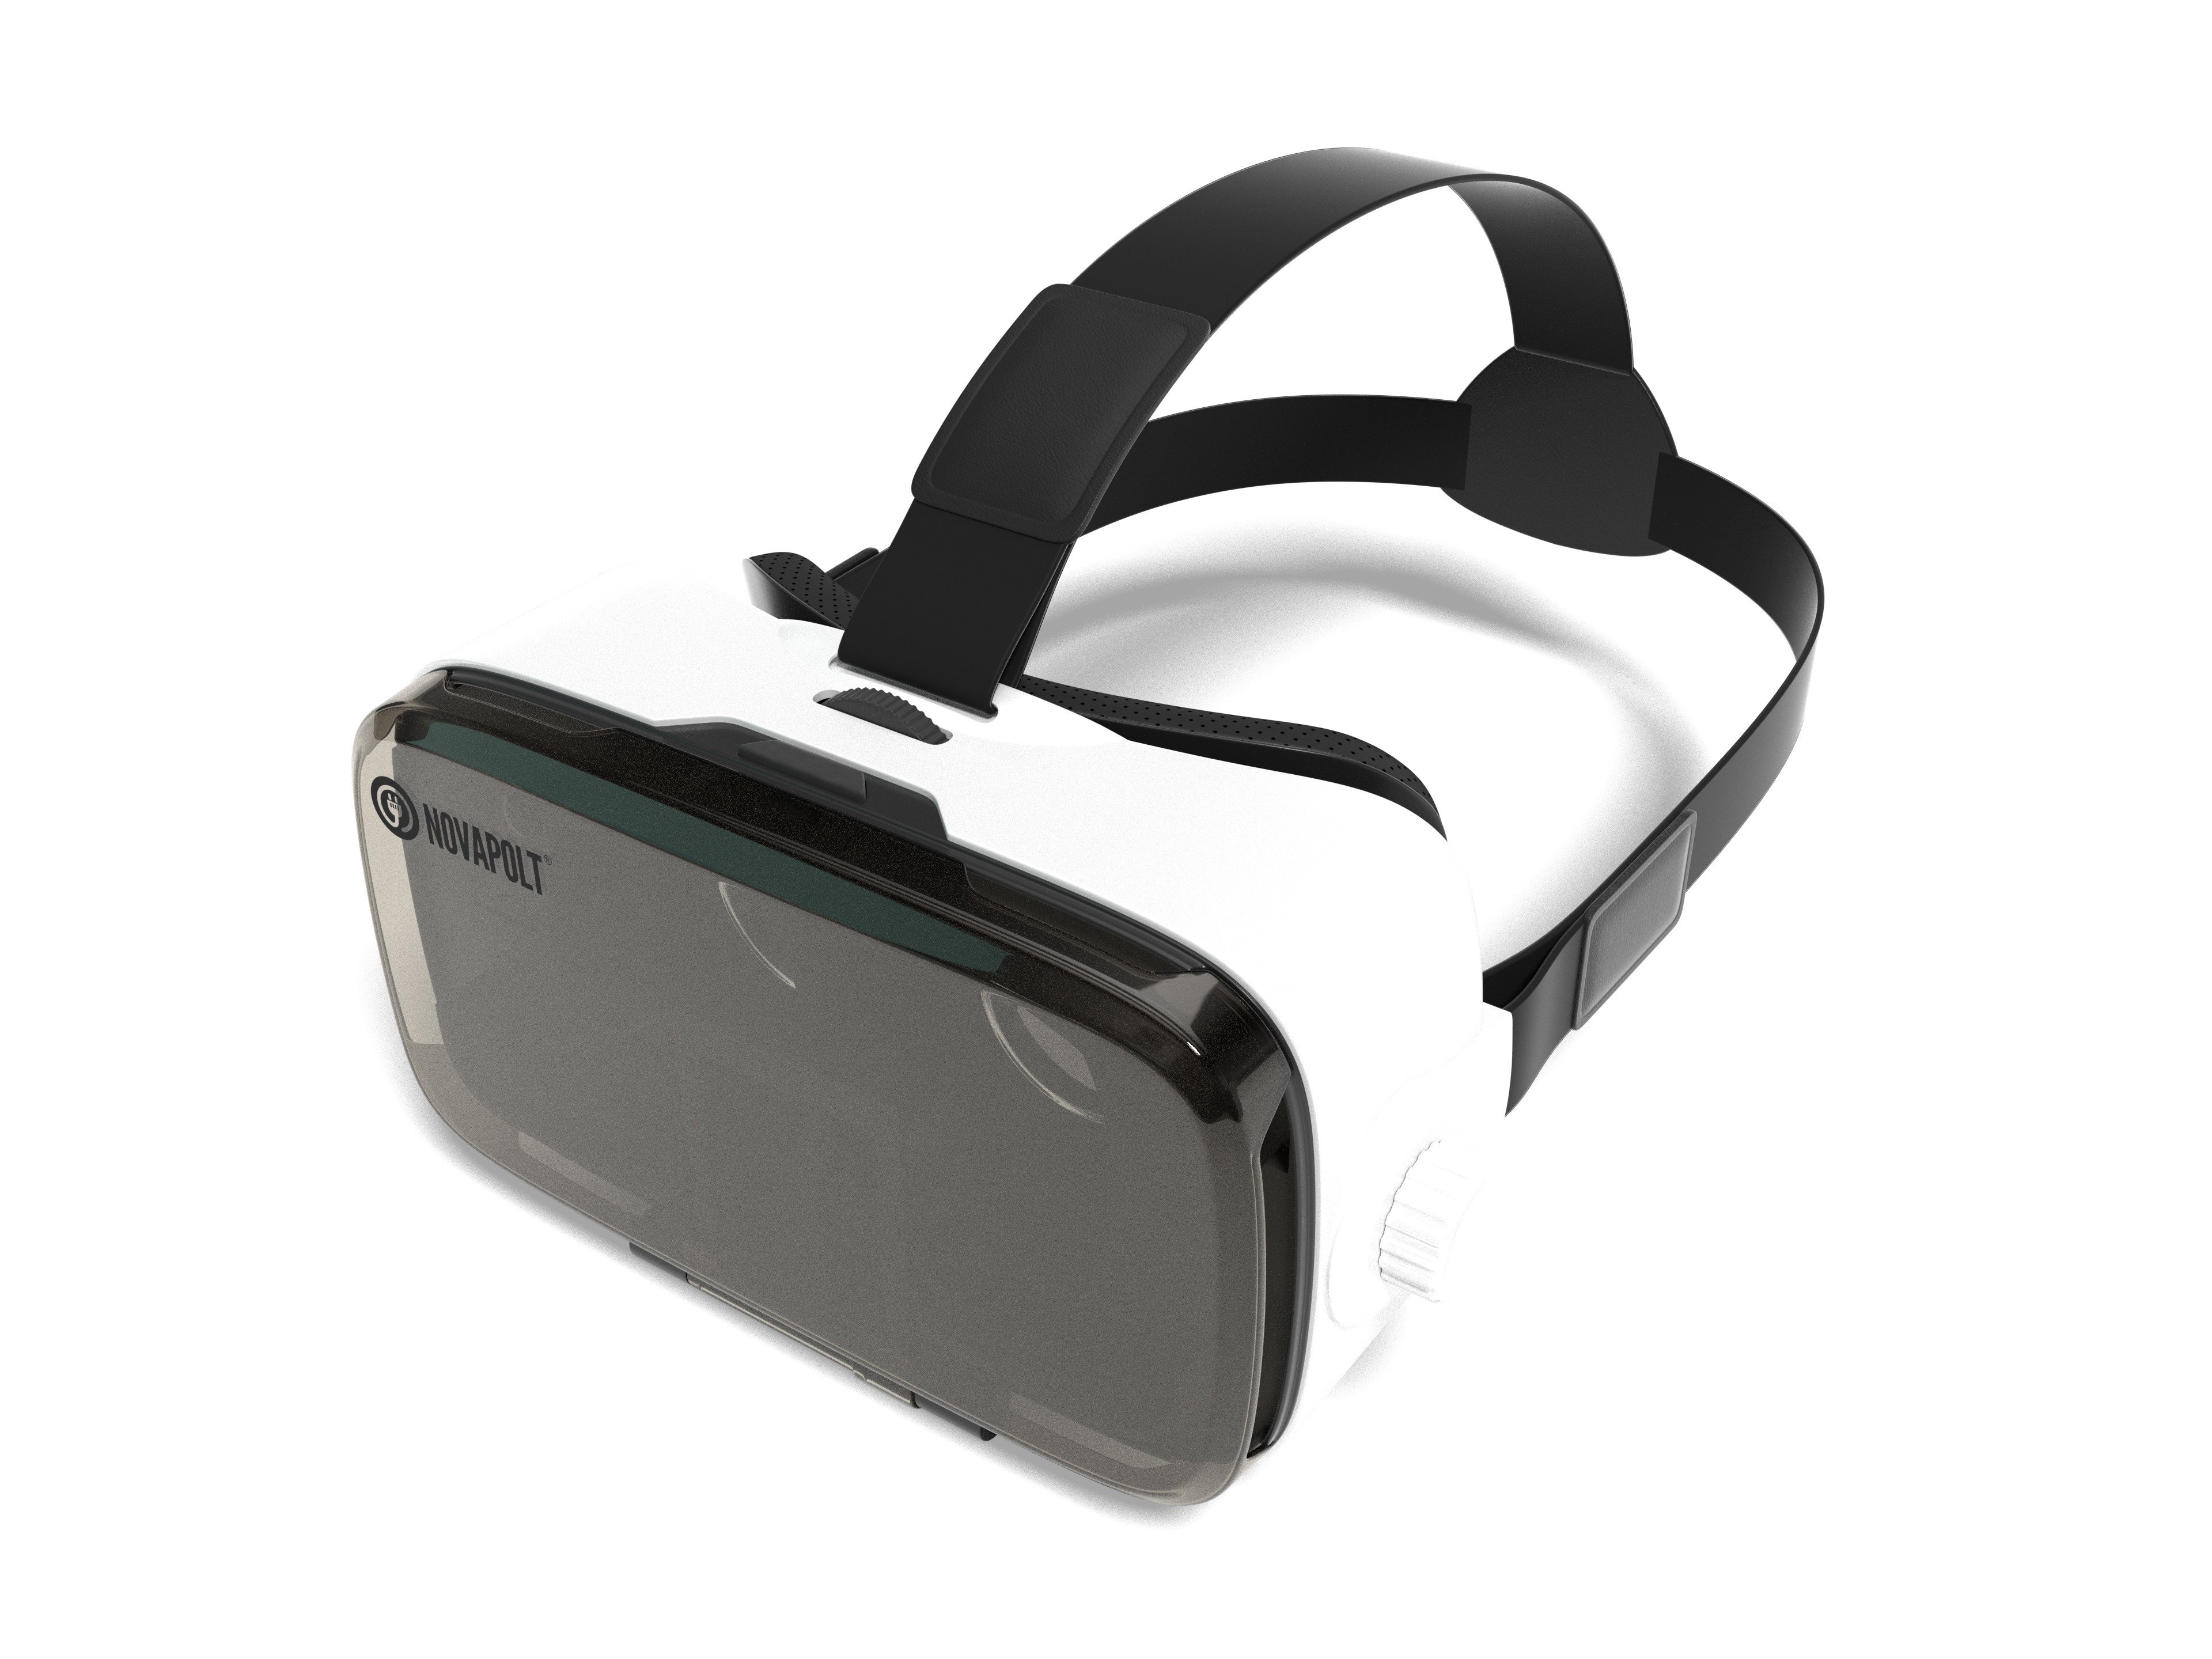 Virtual Reality headset for iPhone and Android 2017 Latest Edition ...